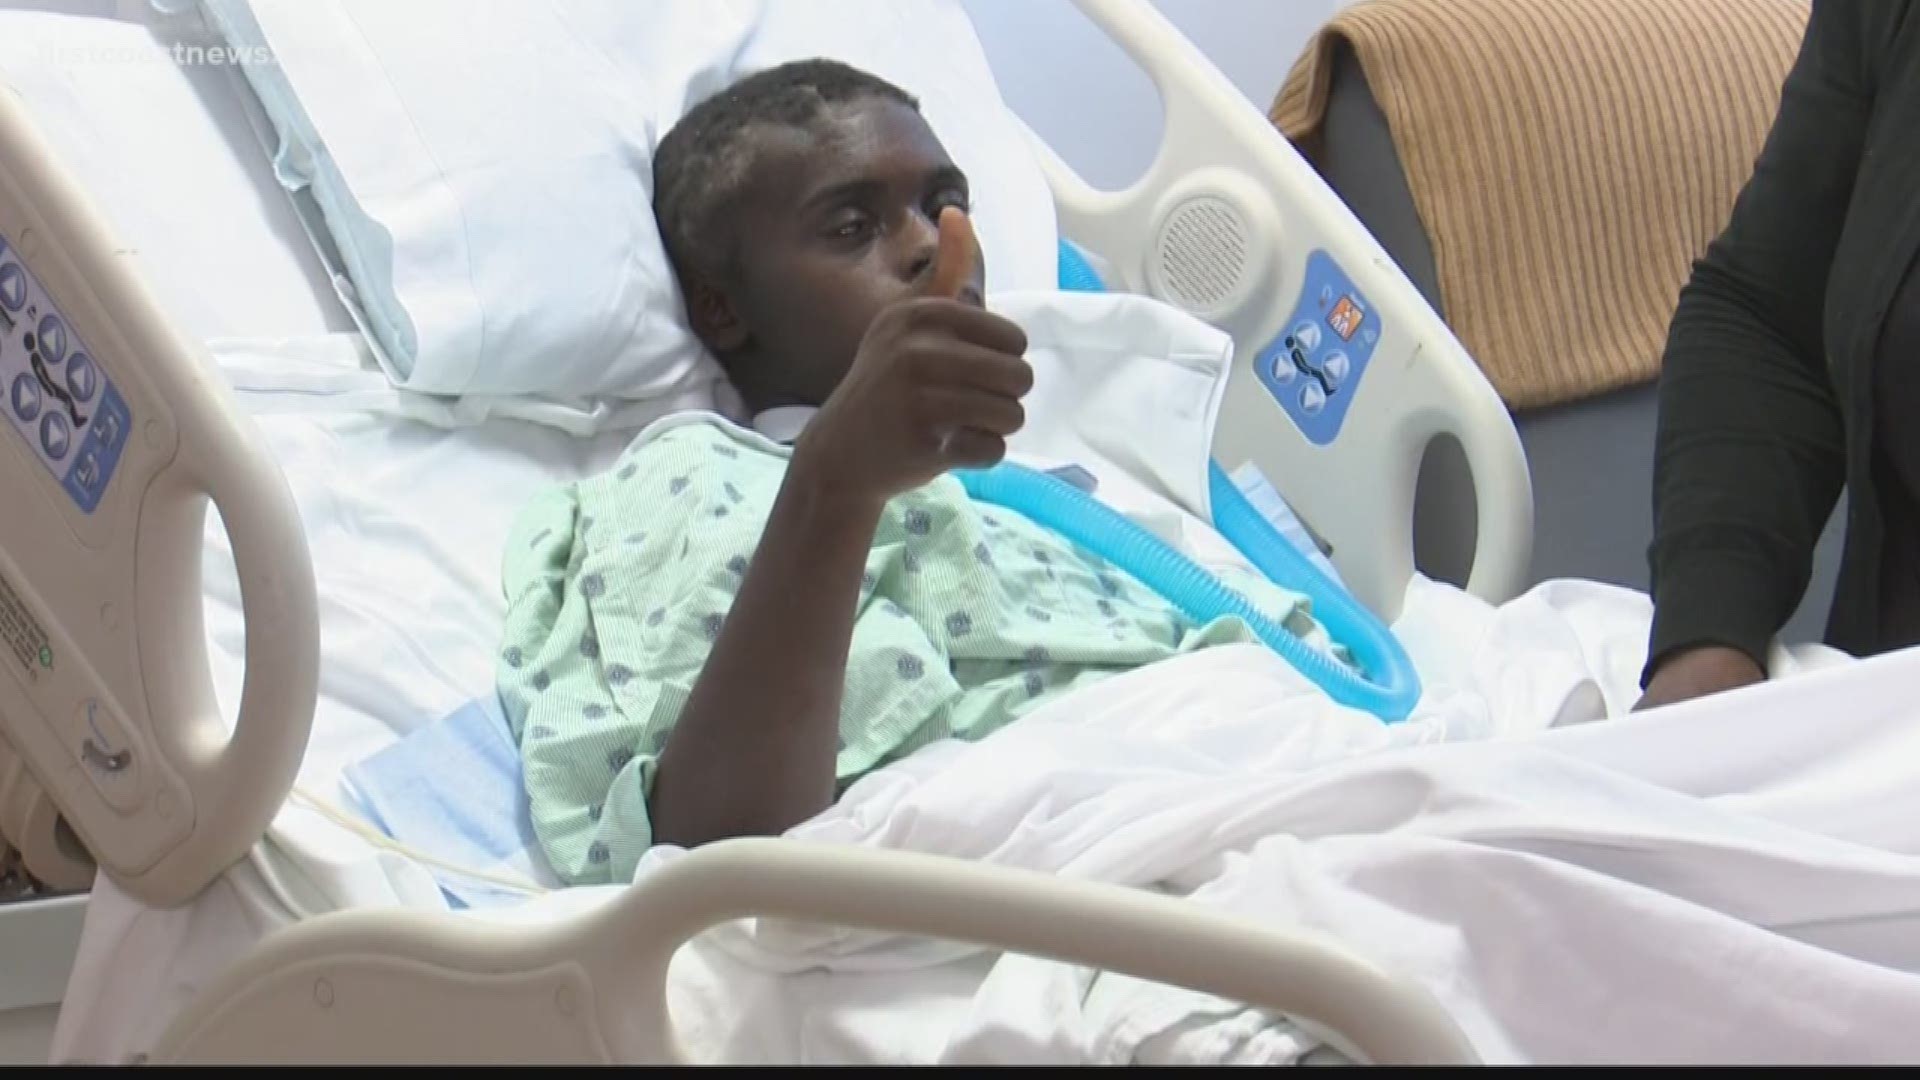 His mother says he is making great progress, but they're in need of financial assistance to move Adrian to Brooks Rehab where he can receive vital care.